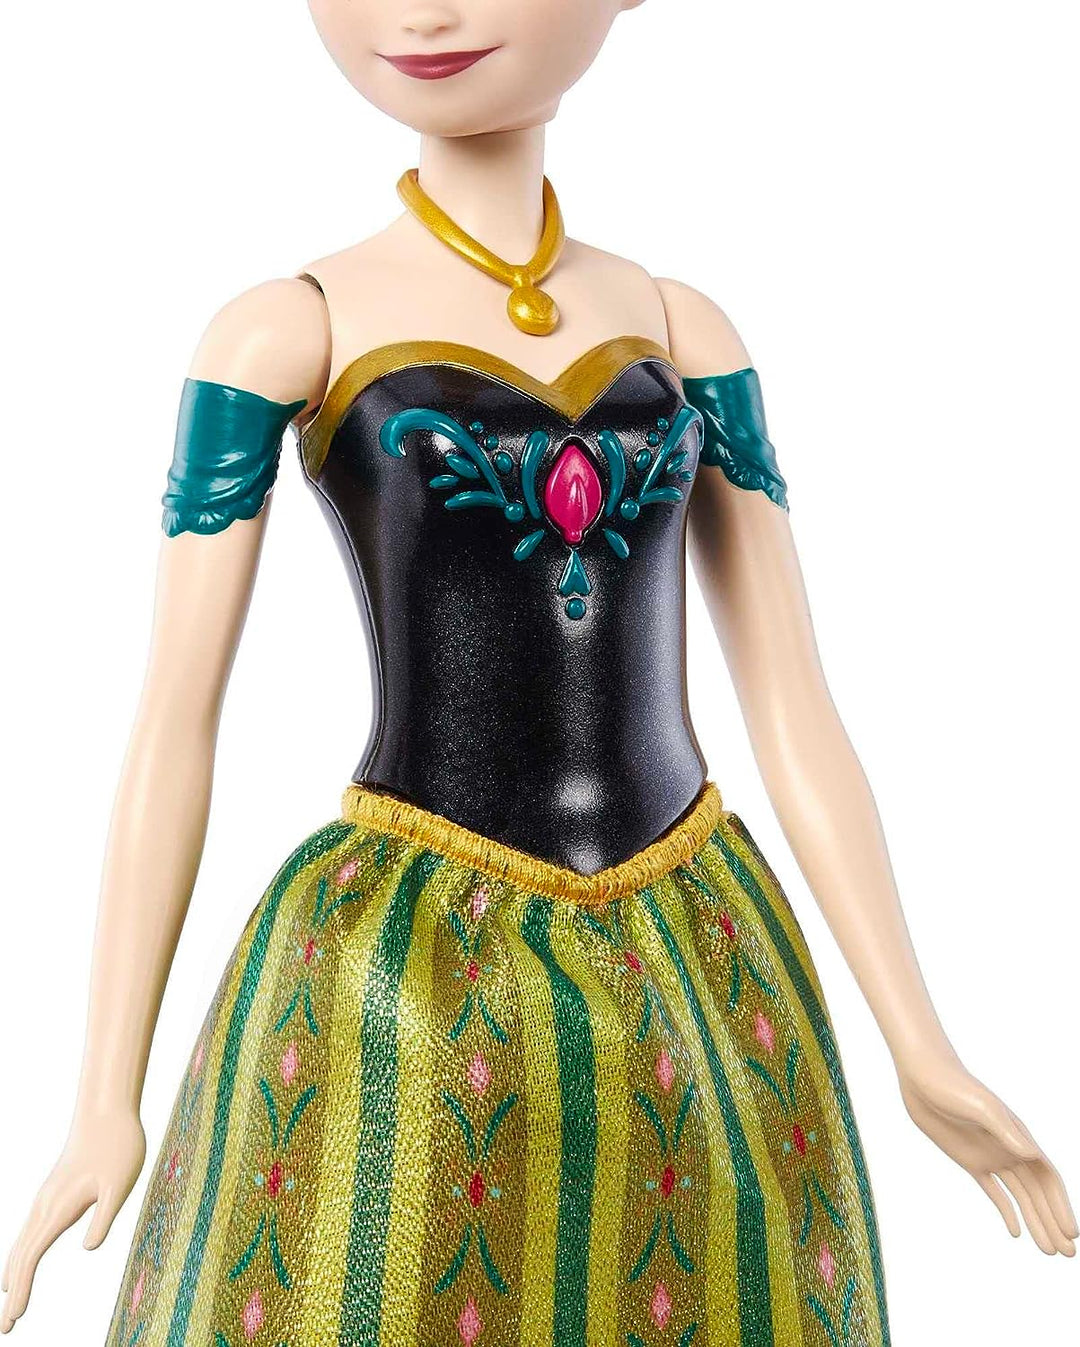 Disney Frozen Toys, Singing Anna Doll in Signature Clothing, Sings “For the First Time in Forever